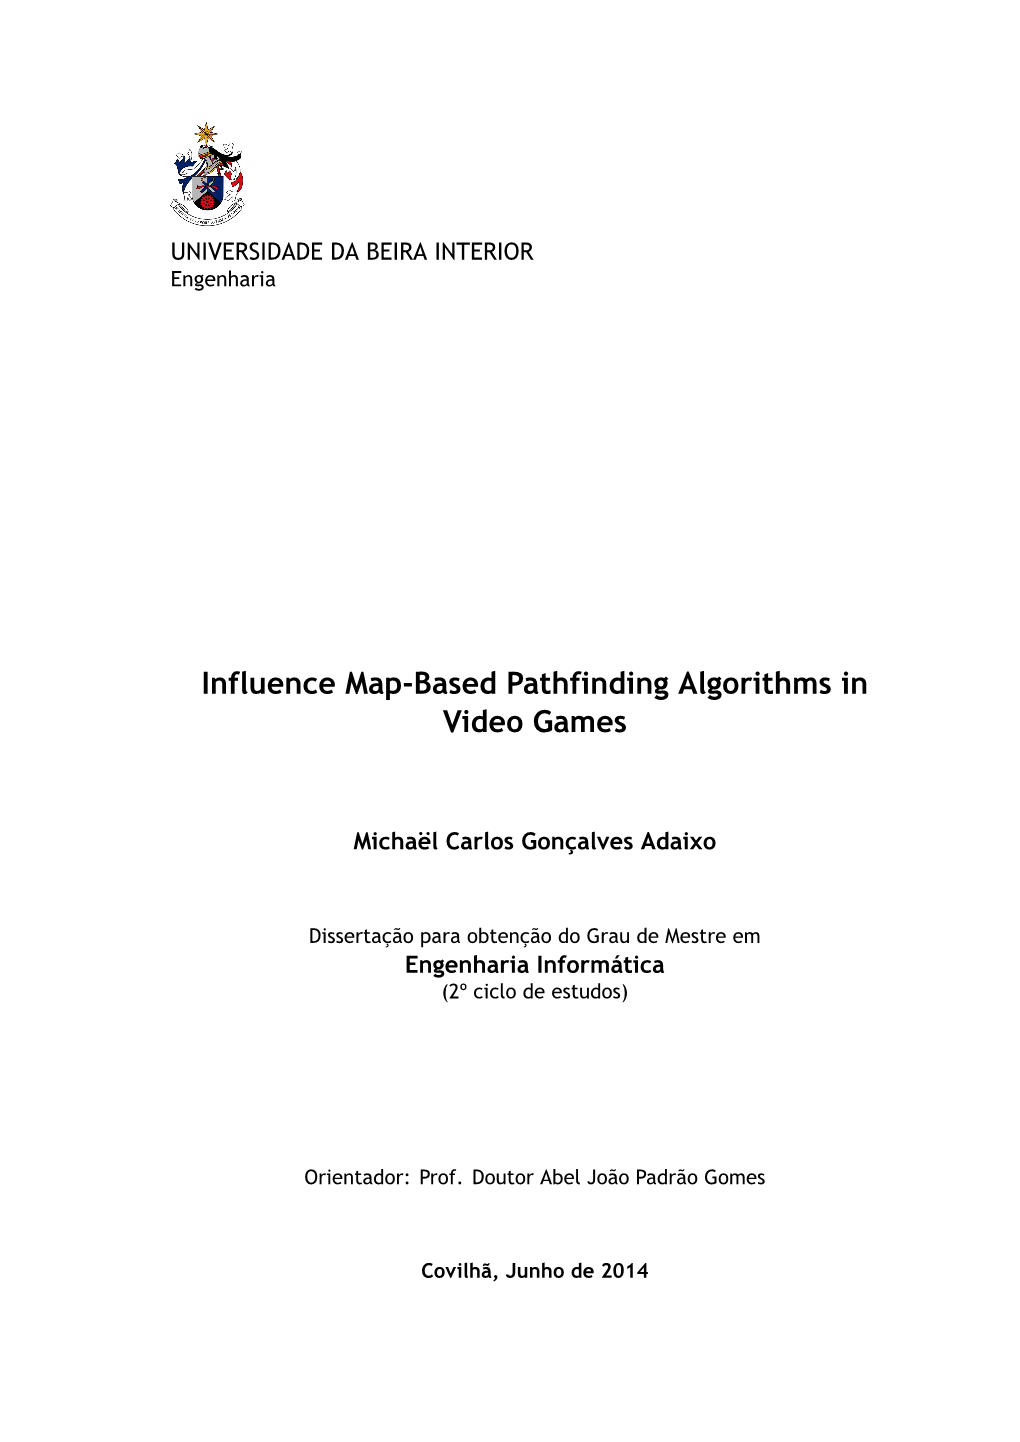 Influence Map-Based Pathfinding Algorithms in Video Games